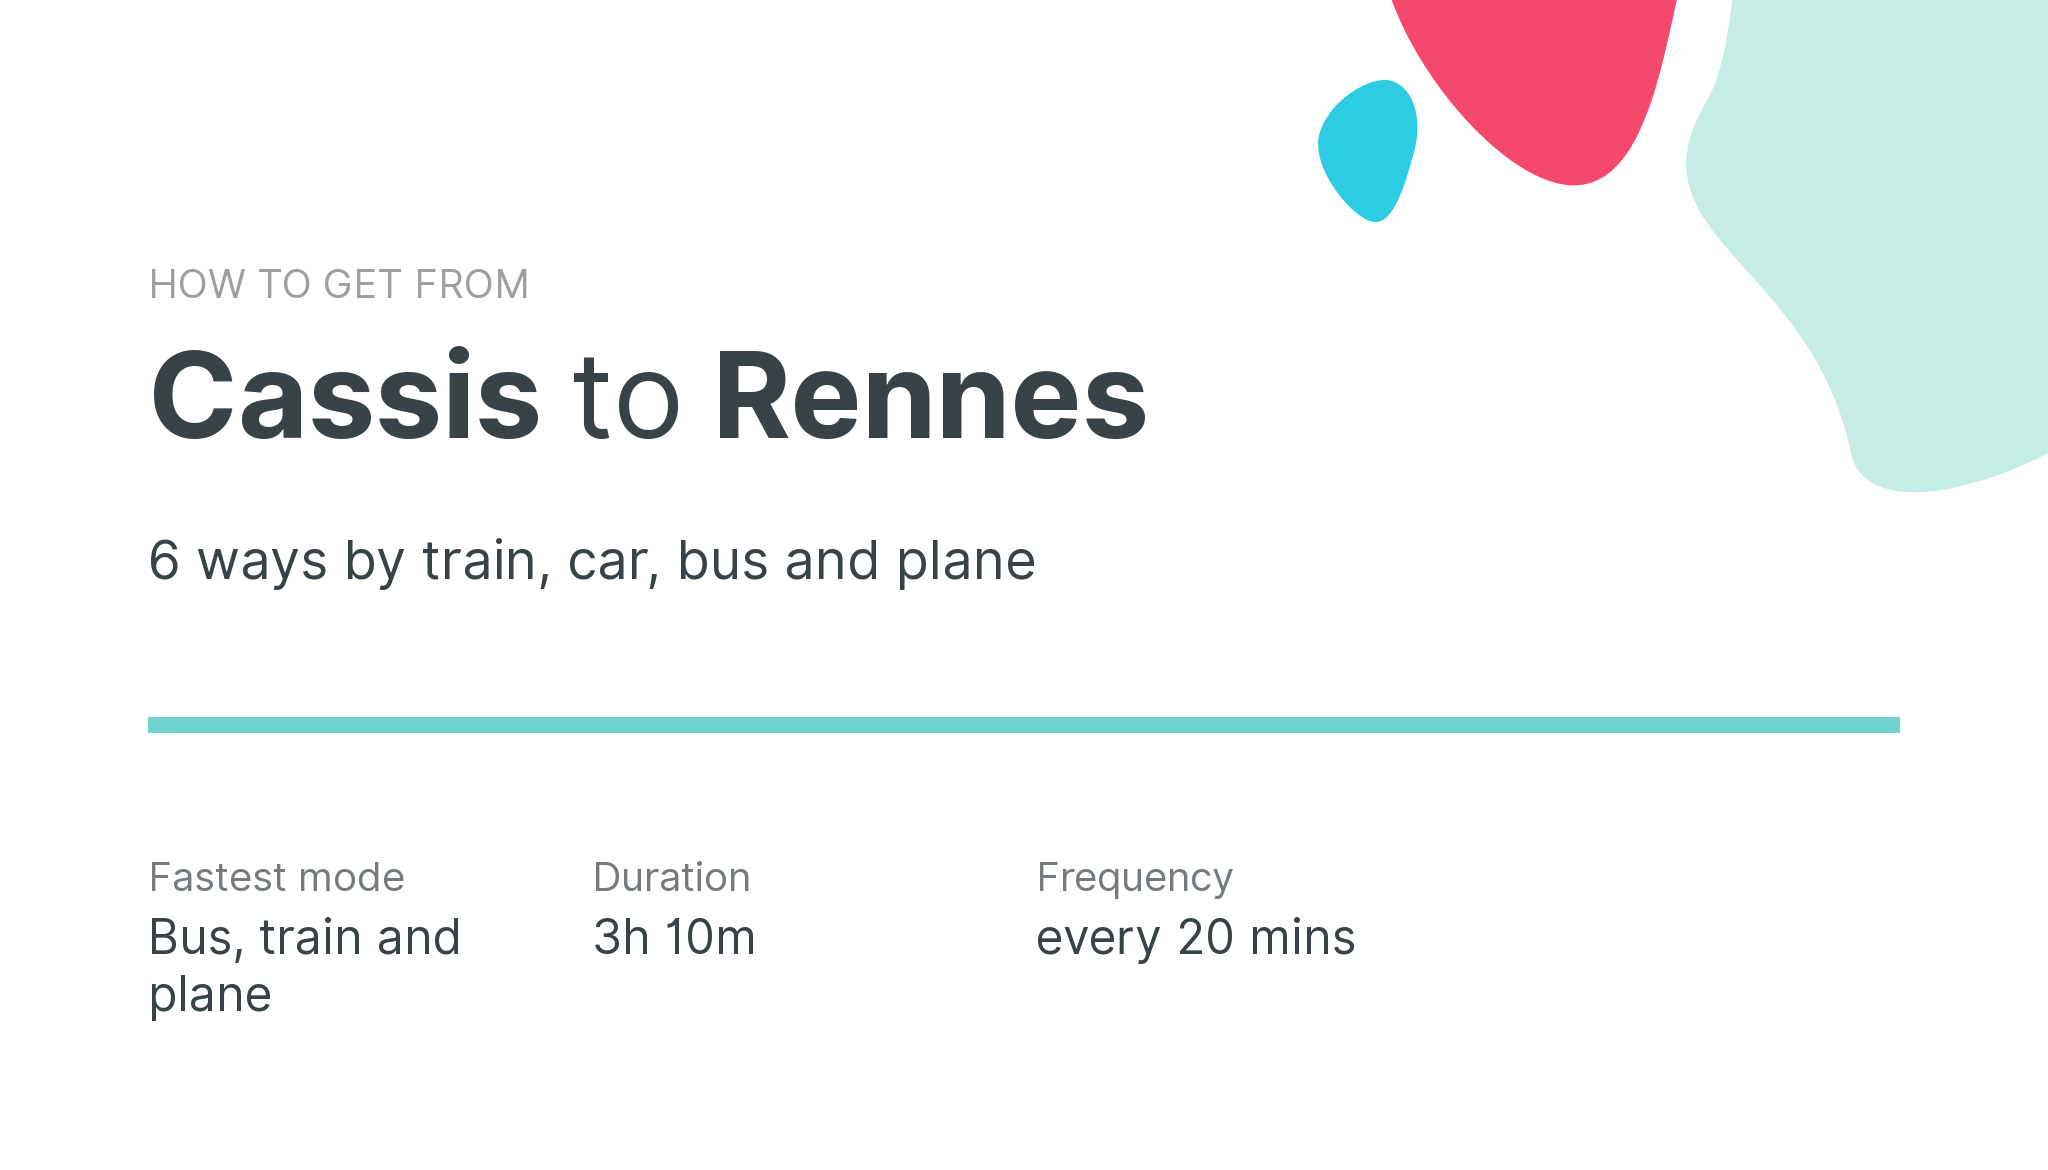 How do I get from Cassis to Rennes